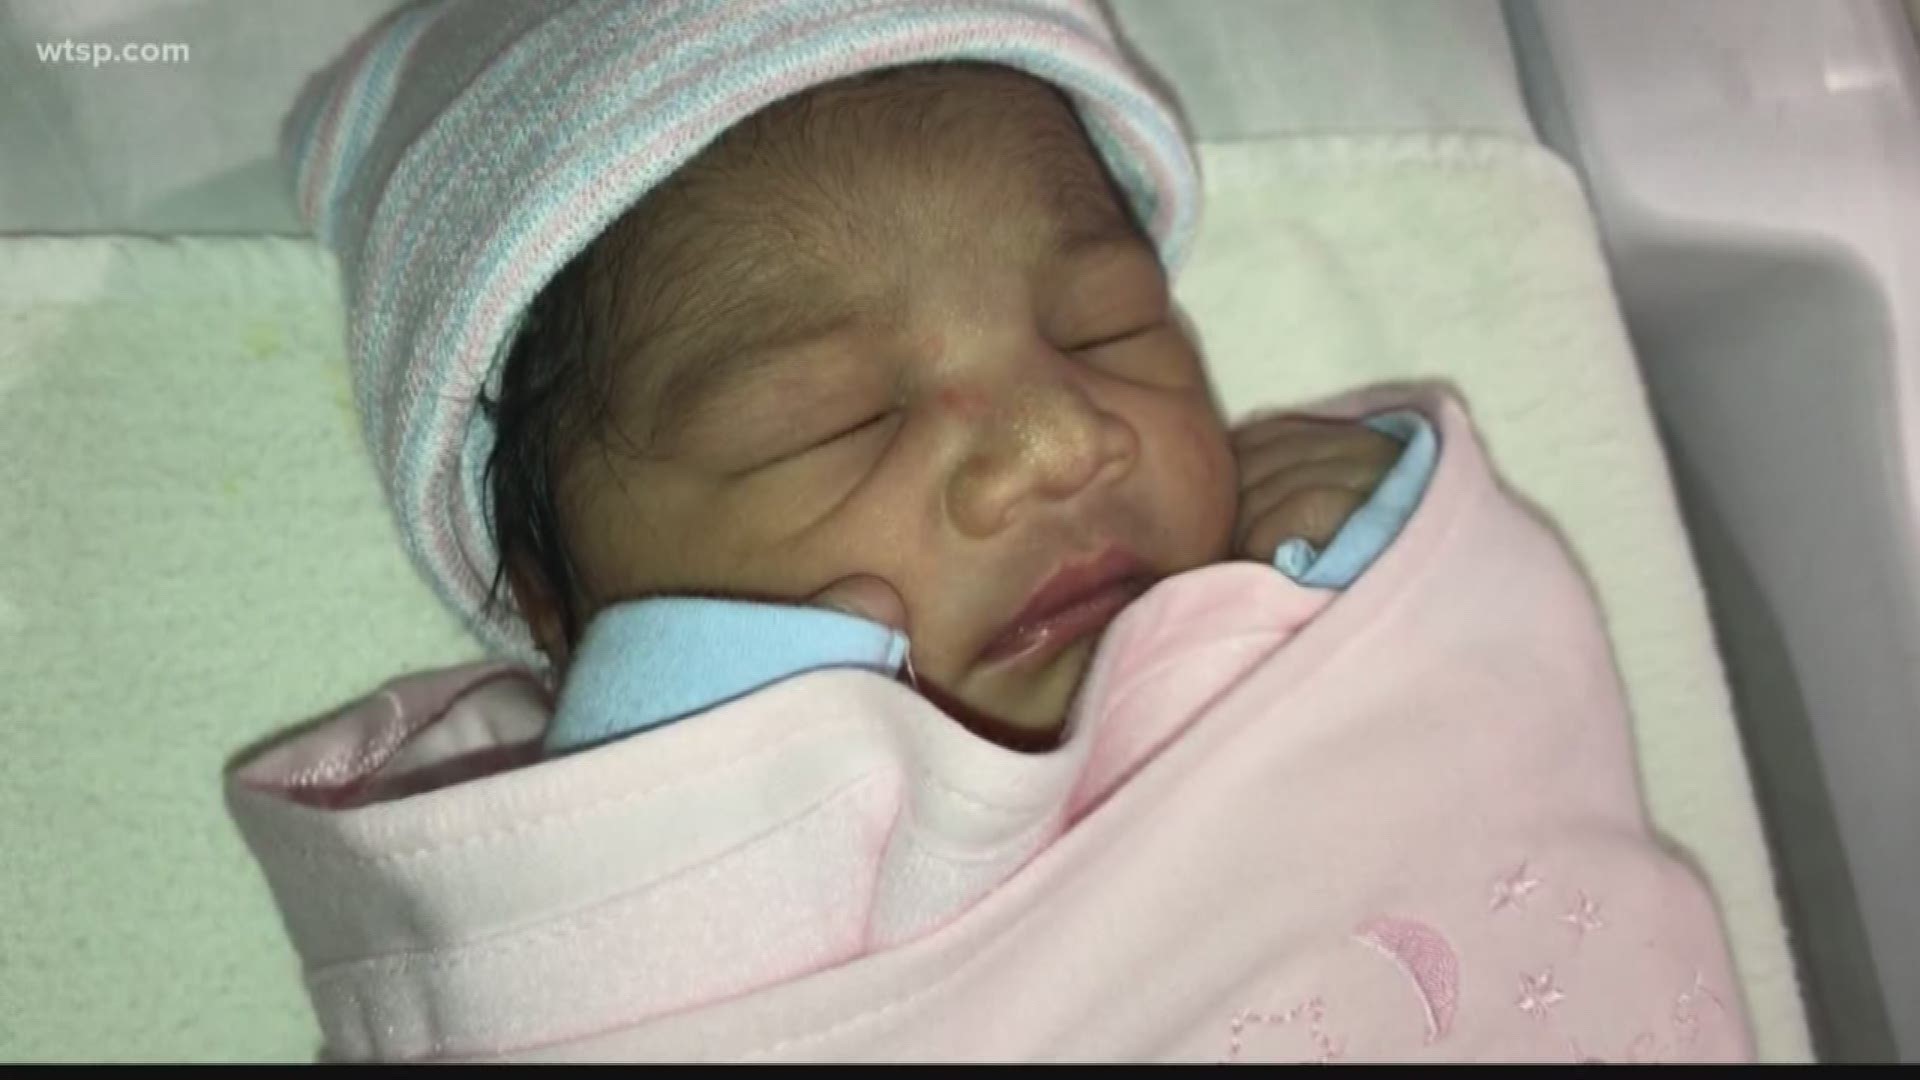 A traveling mother gave birth to a baby girl at Charlotte Douglas International Airport Wednesday - just in time for Thanksgiving.